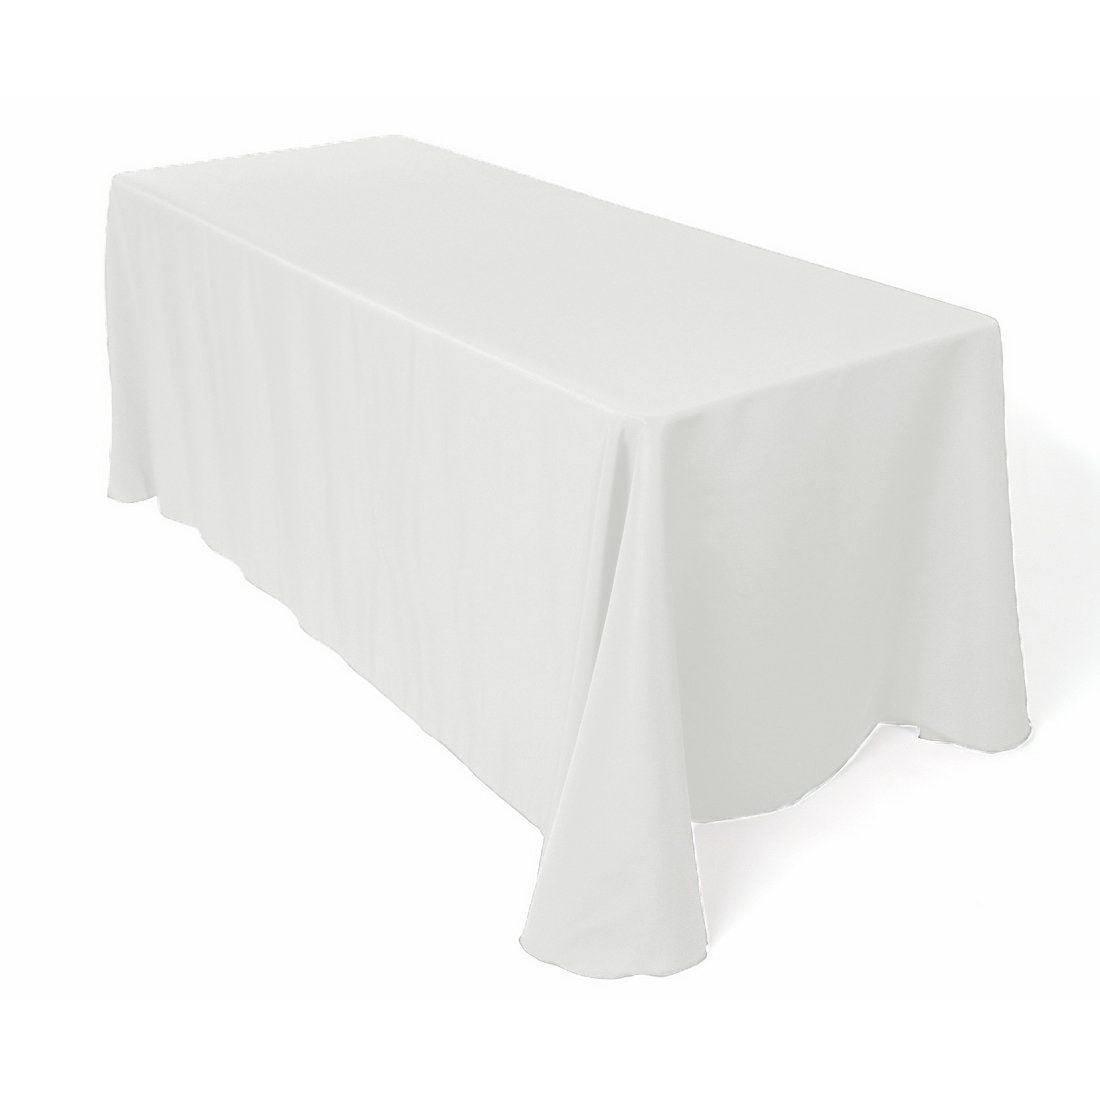 Table Tek Rectangle White Polyester Cloth Table Cover - Hemmed - 90 inch x 132 inch - 10 Count Box, Size: One Size